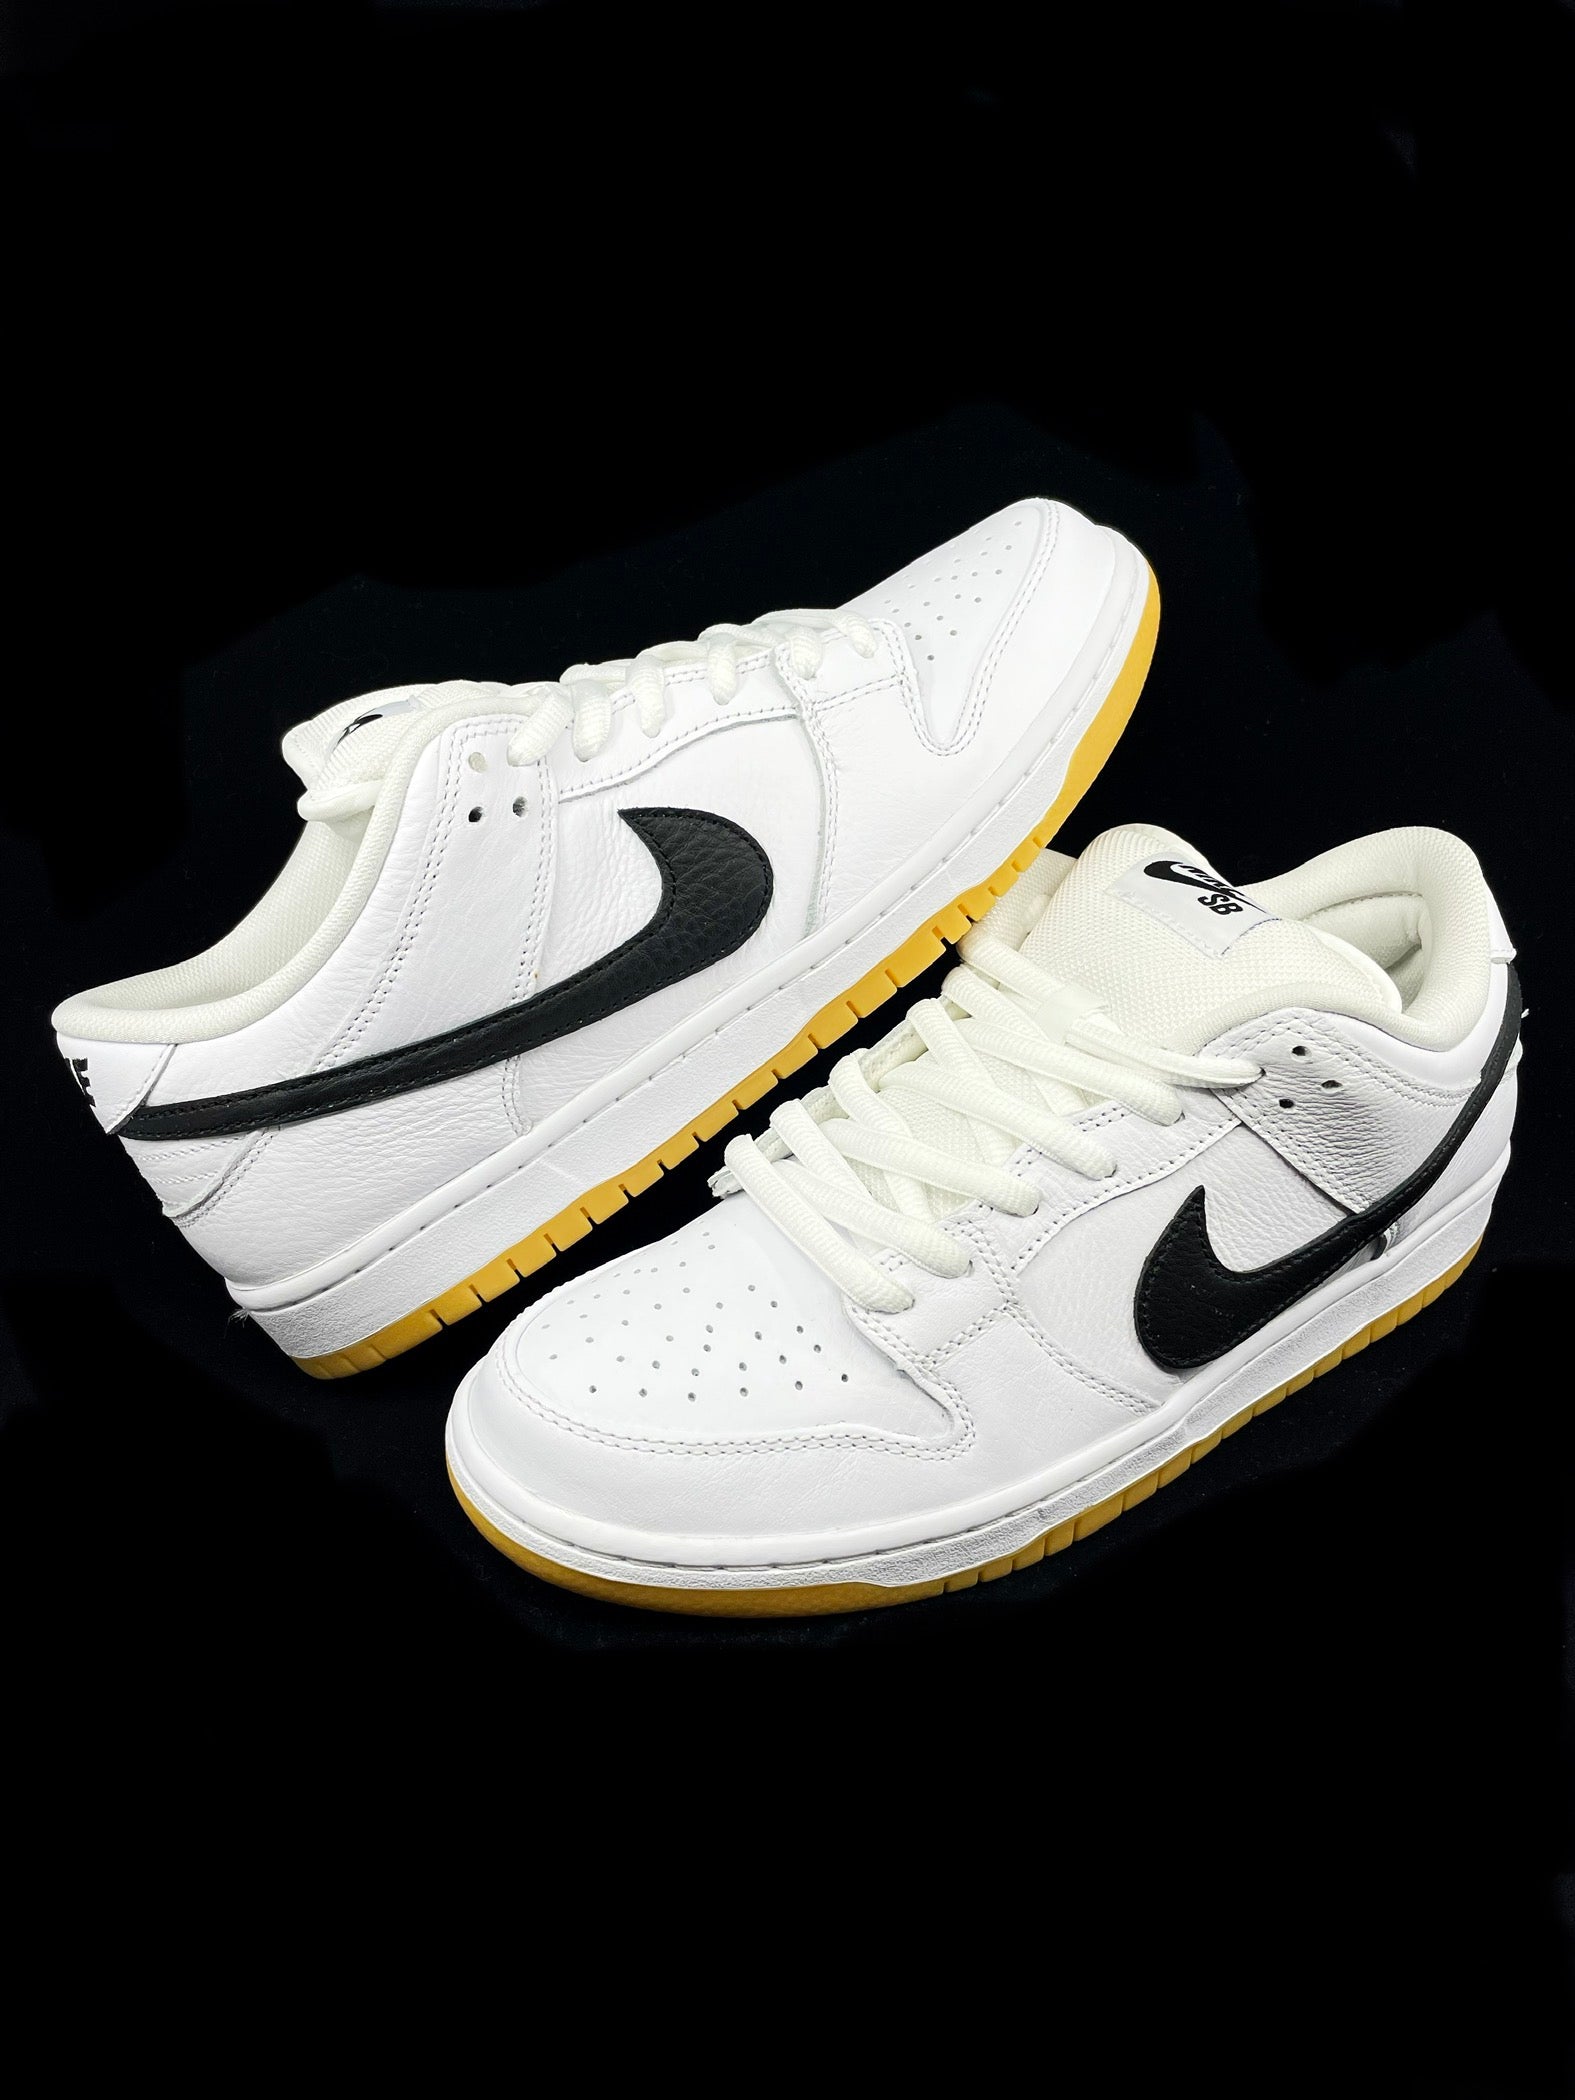 Nike SB Dunk Low Pro 'White Gum' – The Overtime Store